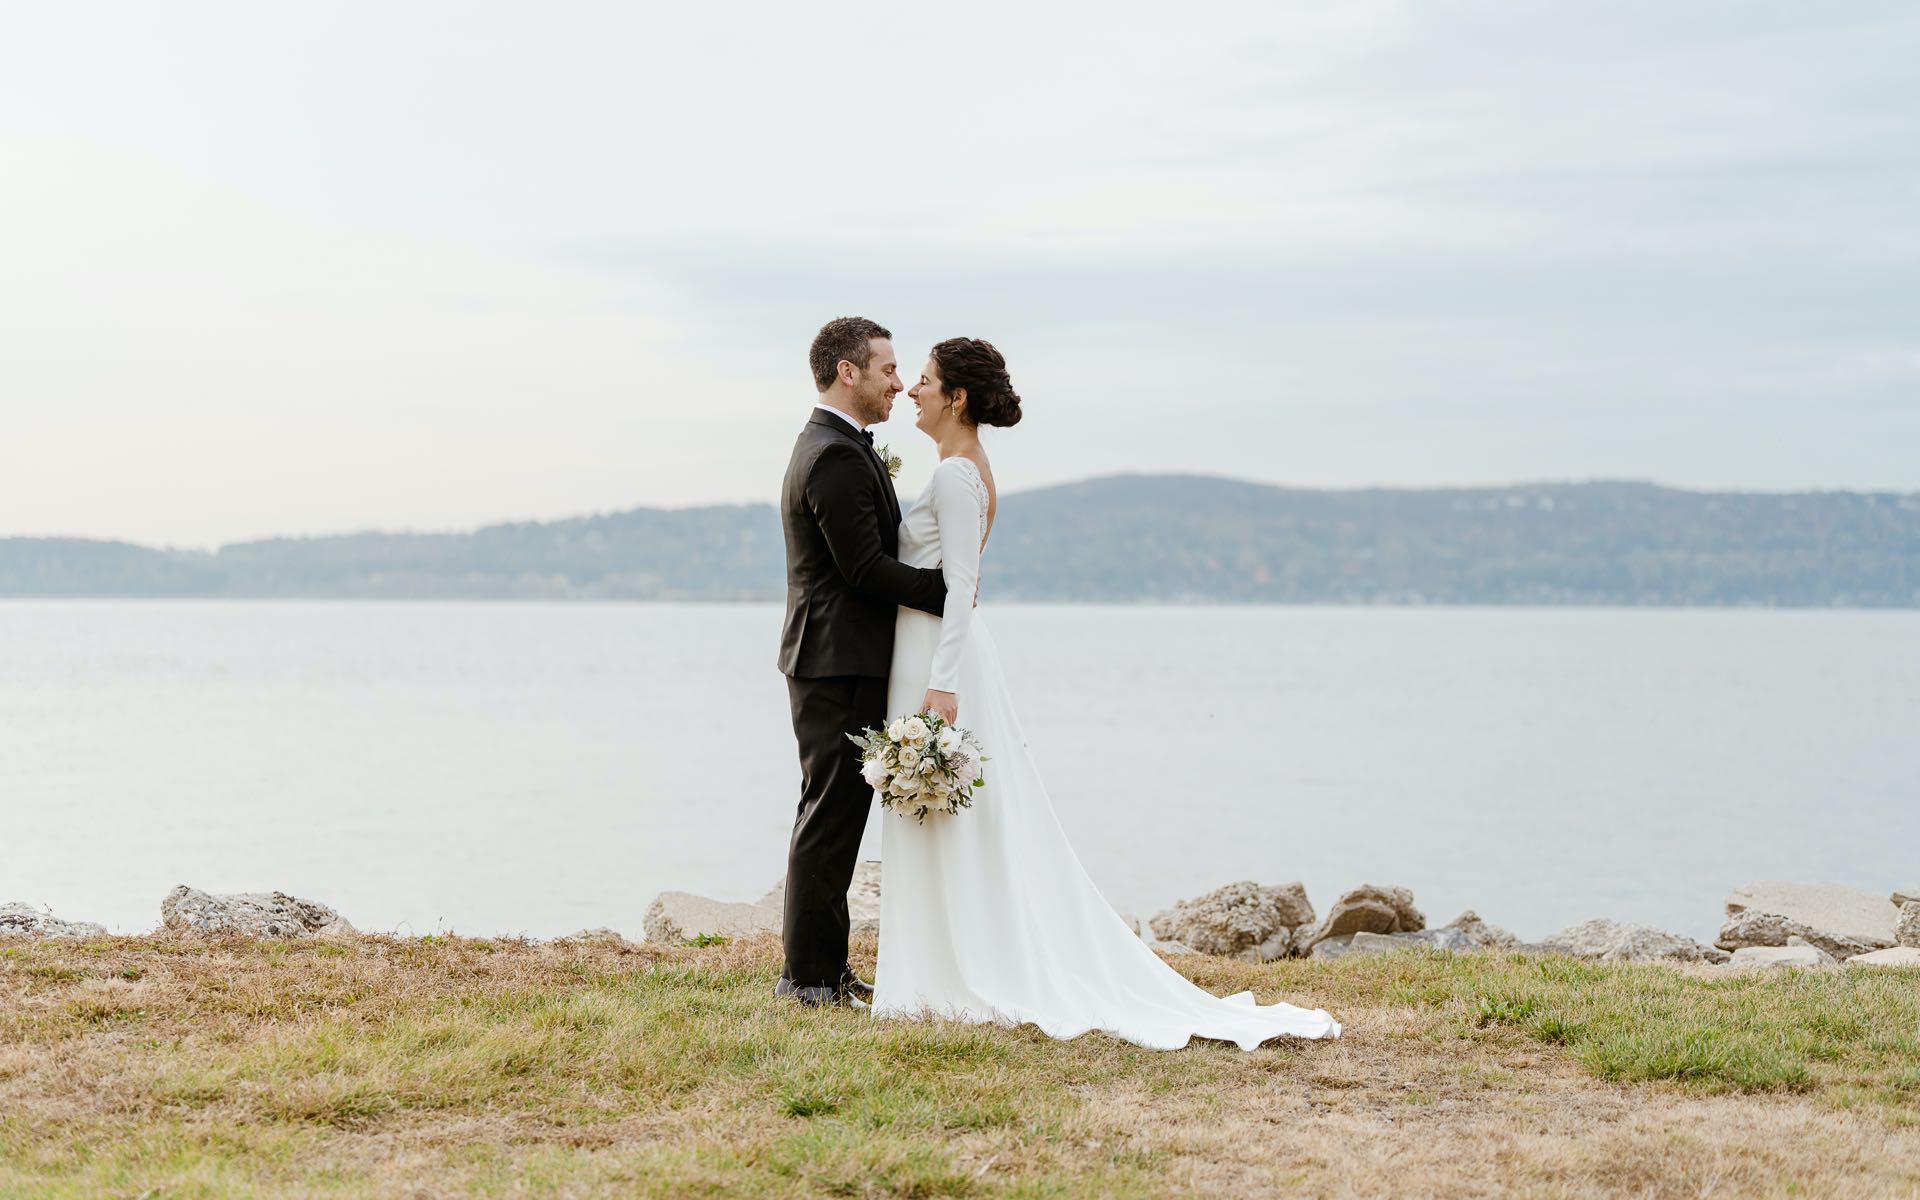 A couples first look on the Hudson river in Irvington New York with views of the Mario Cuomo bridge and the Rockland county coastline